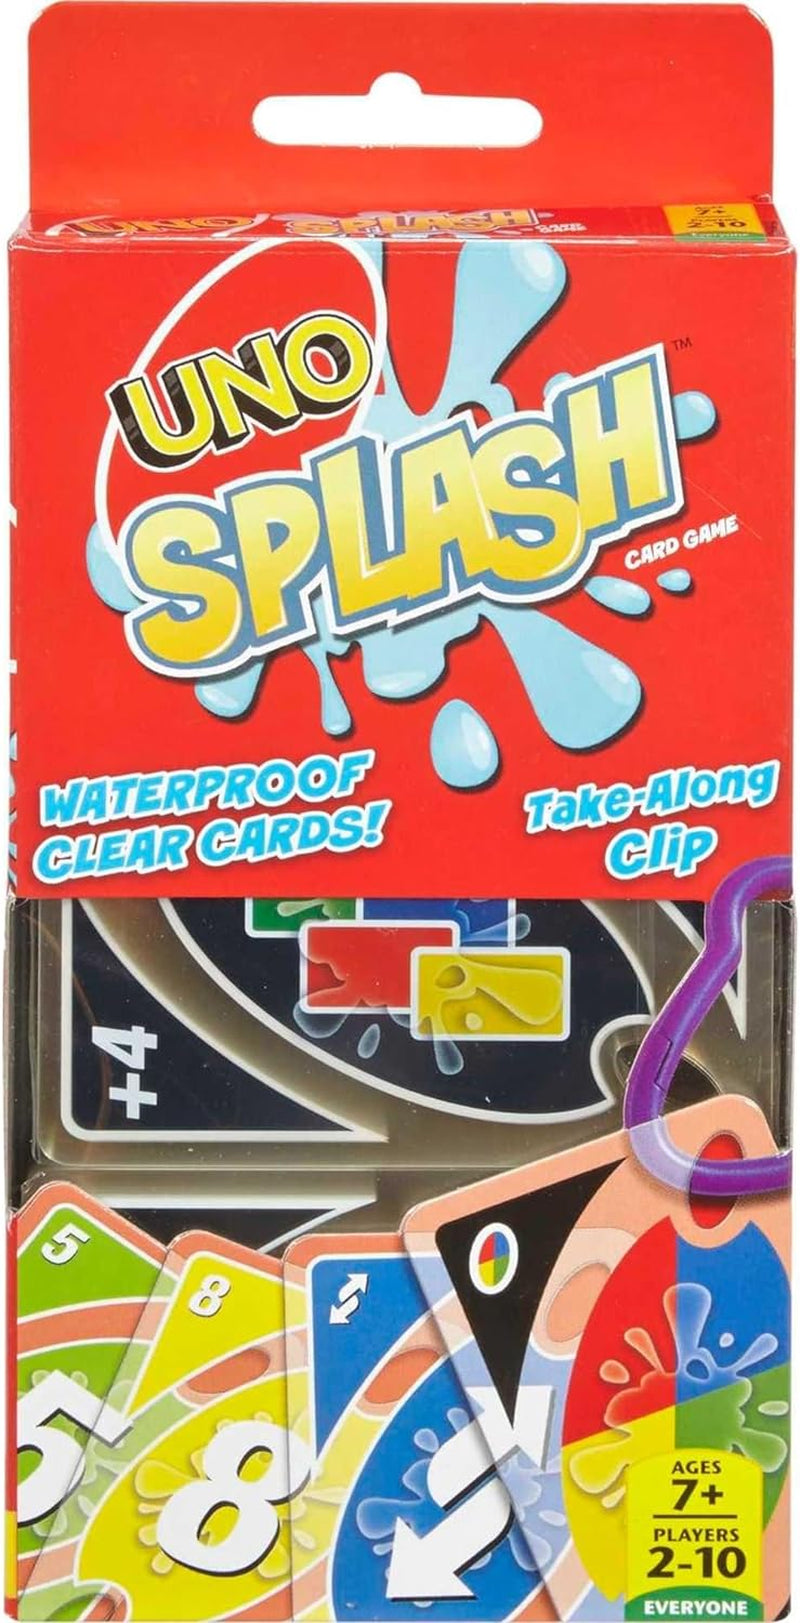 ​UNO Splash Card Game for Outdoor Camping, Travel and Family Night with Water-Resistent Plastic Cards